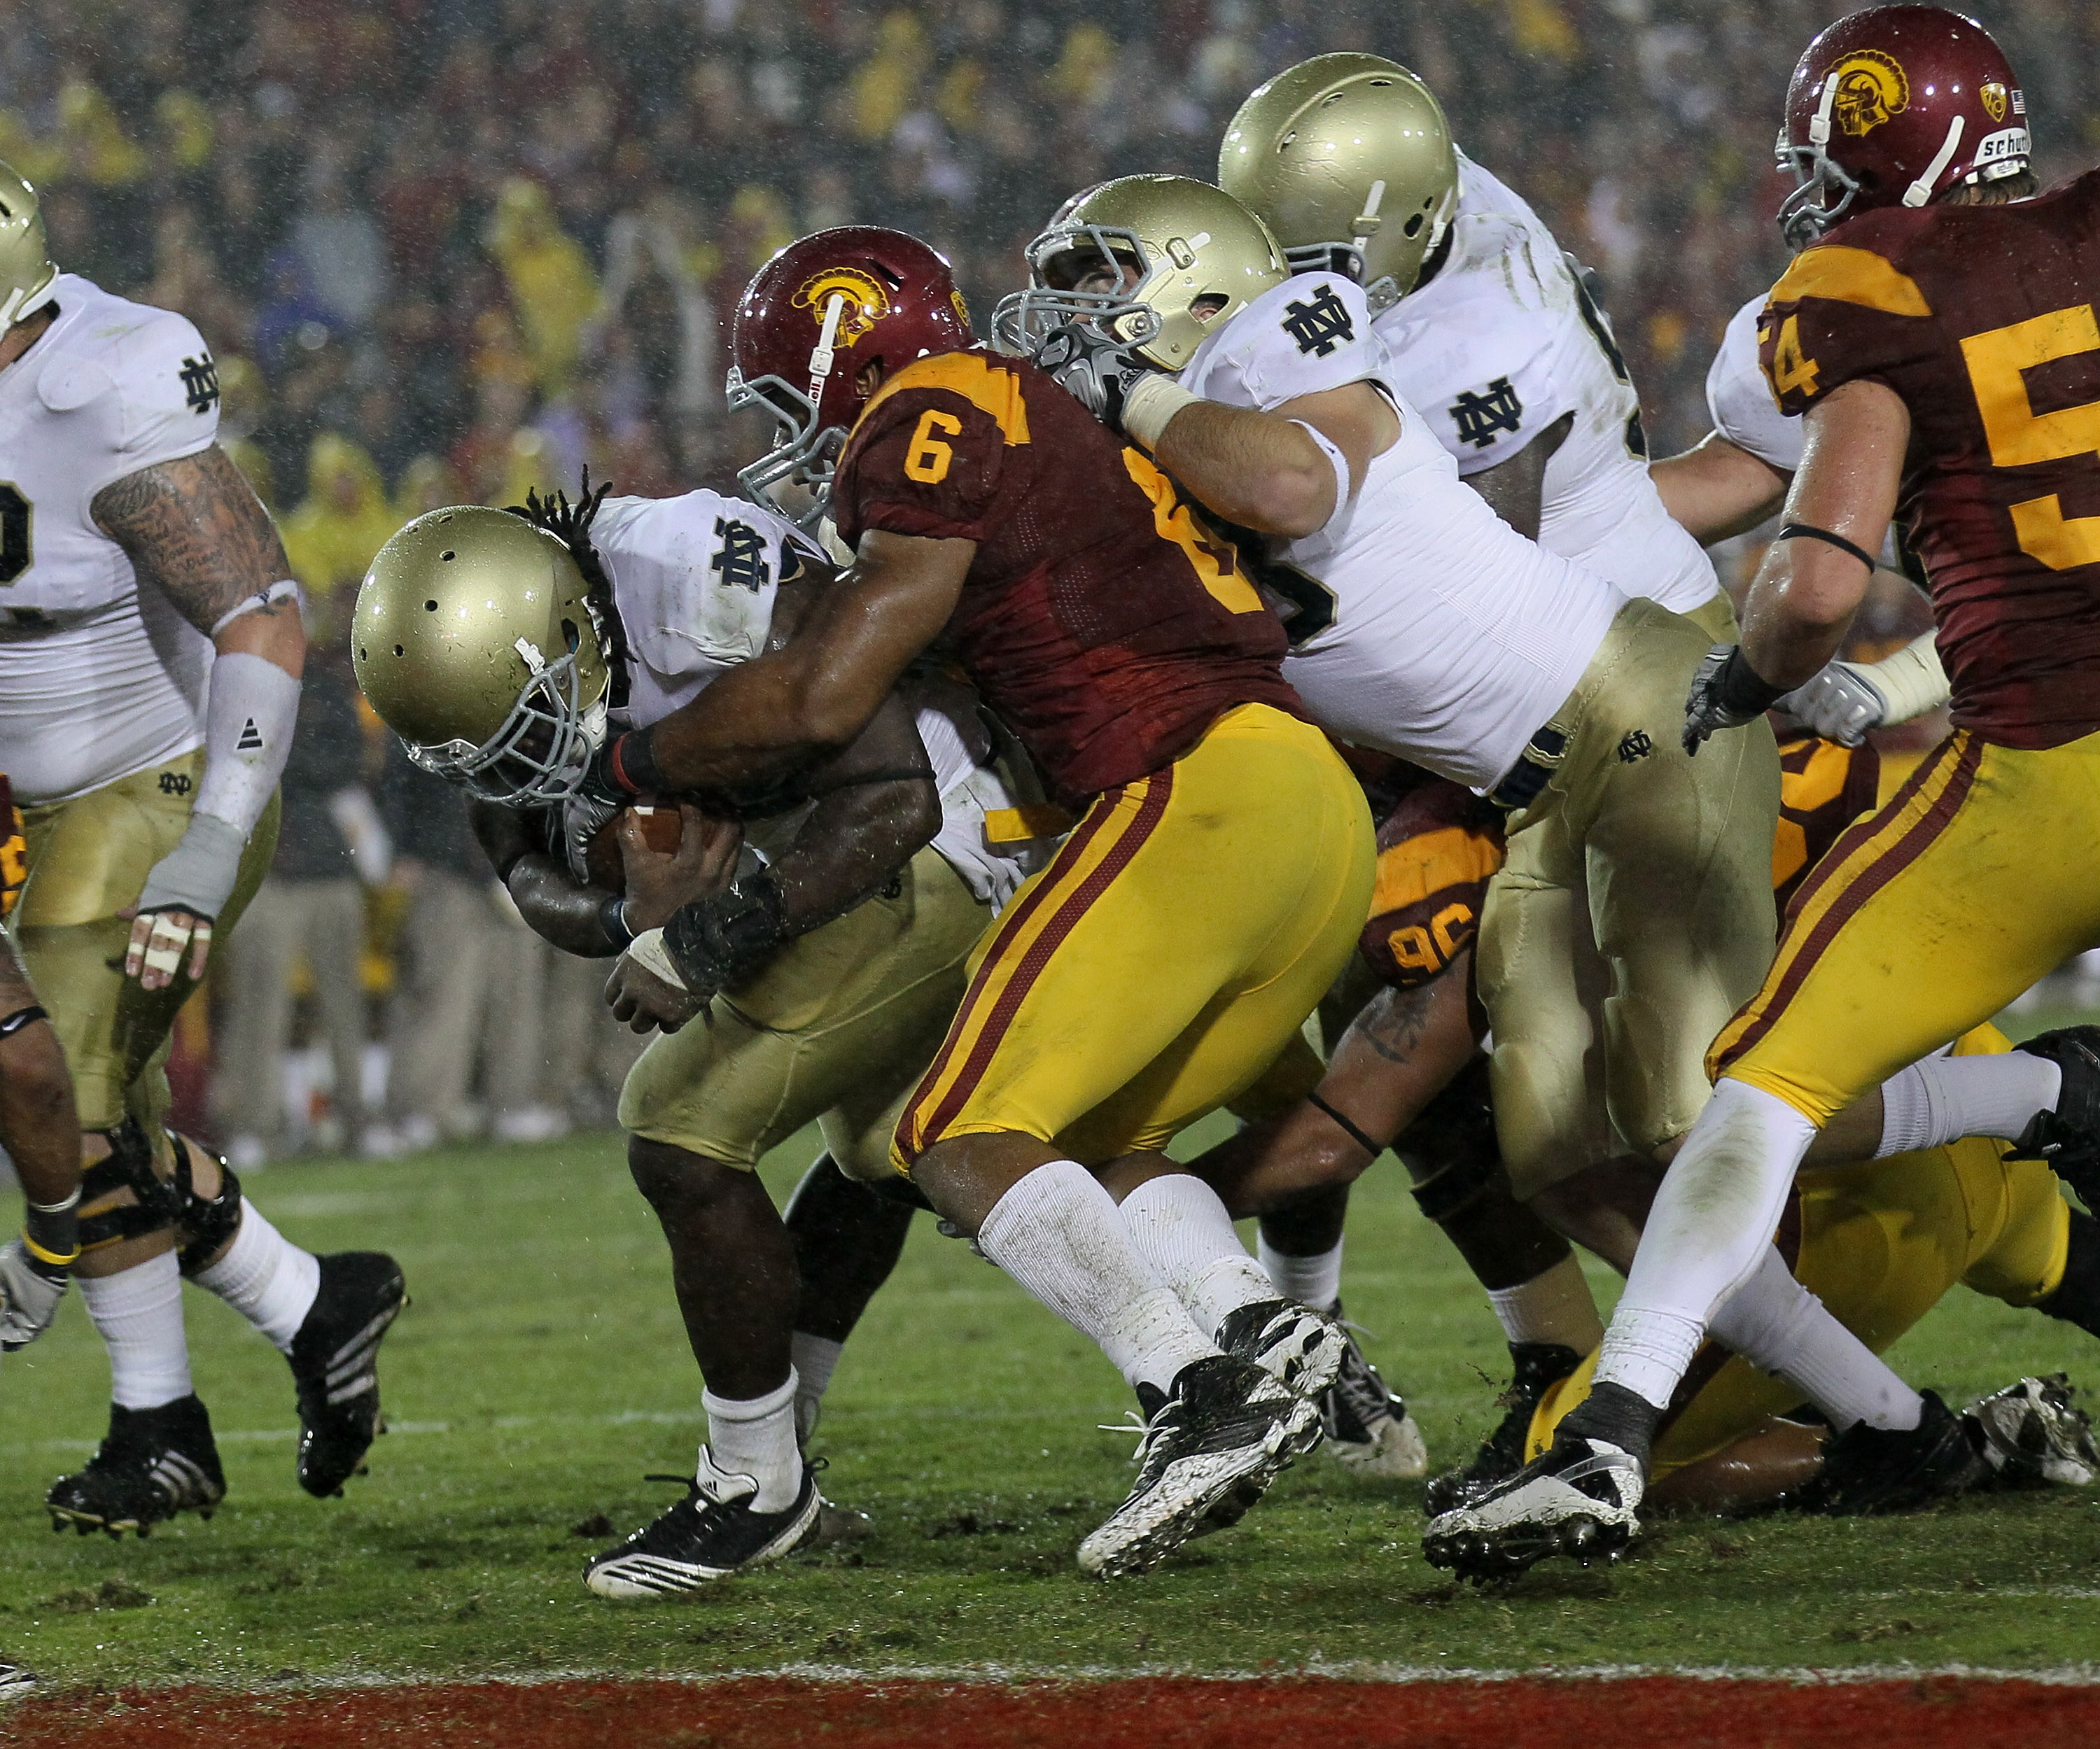 LOS ANGELES, CA - NOVEMBER 27:  Running back Robert Hughes #33 of the Notre Dame Fighting Irish carries on a five yard run to score the eventual winning touchdown in the fourth quarter through the tackle of linebacker Malcolm Smith #6 of the USC Trojans a